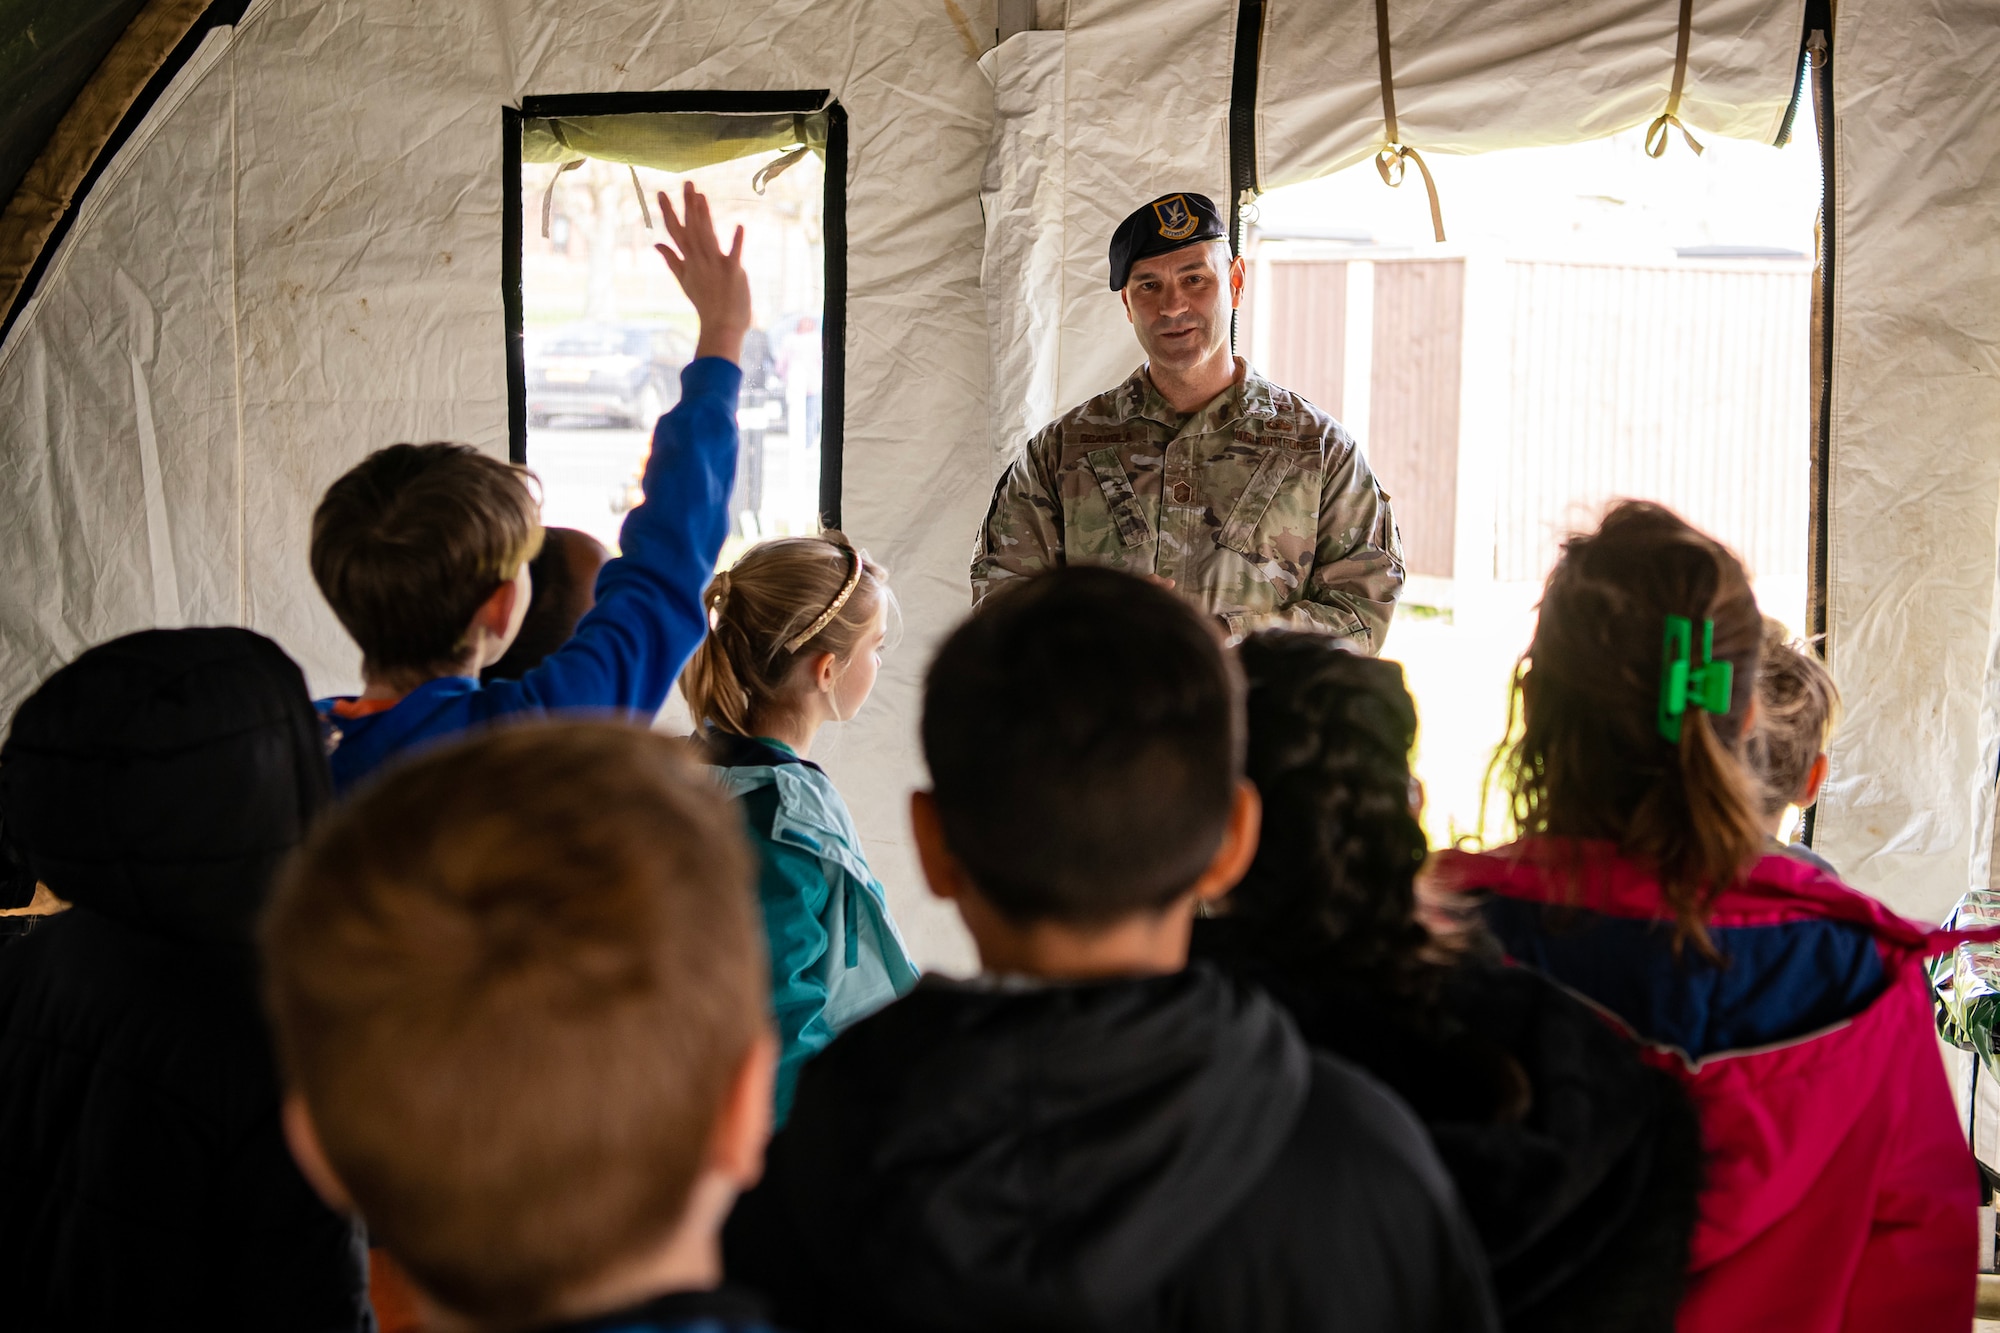 U.S. Air Force Chief Master Sgt. Richard Scavola, 423d Air Base Group Senior Enlisted leader, speaks to Alconbury Elementary School students during Camp Kudos at RAF Alconbury, England, April 14, 2023. The camp gave students the opportunity to experience and learn about various aspects of deployment preparation and the wing mission. (U.S. Air Force photo by Staff Sgt. Eugene Oliver)